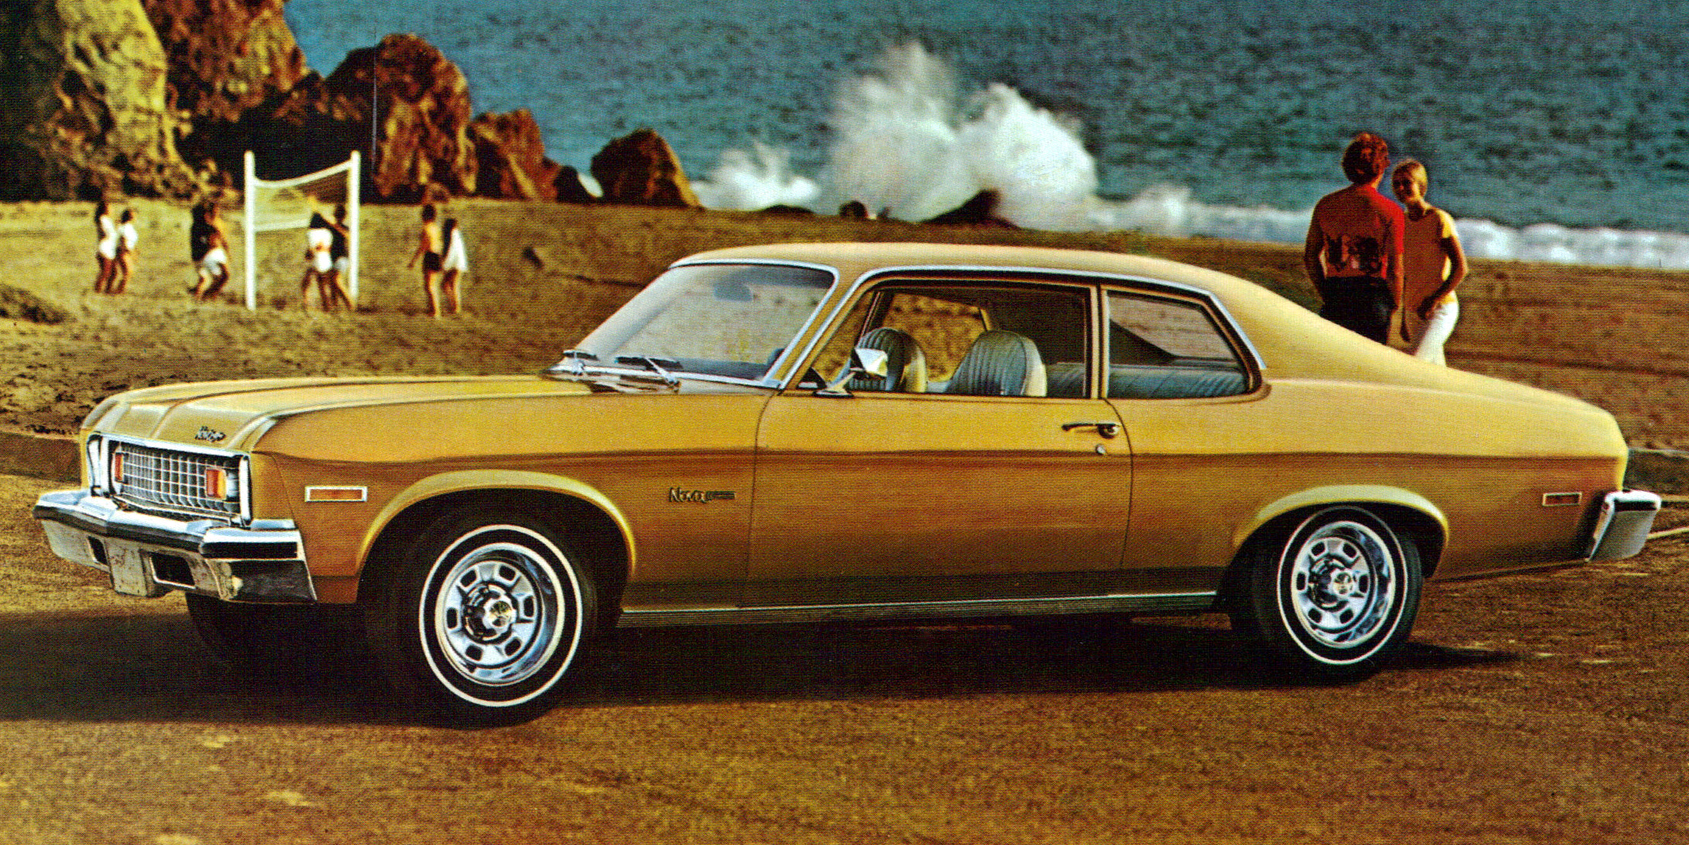 1973 Chevy Nova Coupe, Fastest Cars of 1973